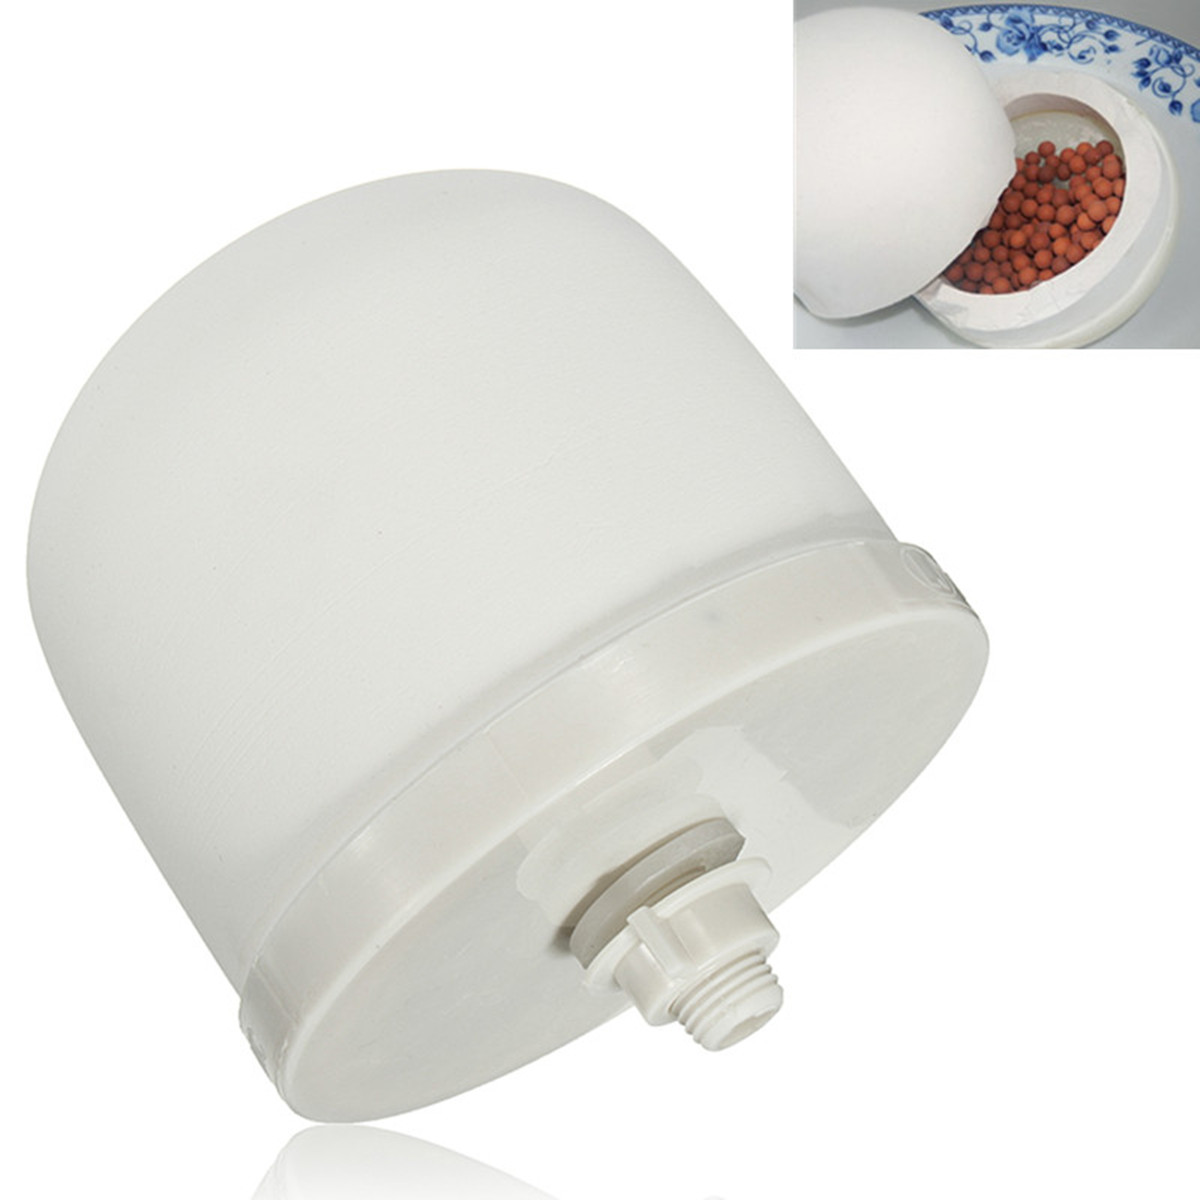 Ceramic-Dome-Water-Filter-System-Replacement-Cartridge-Mineral-Drinking-Purifier-1375338